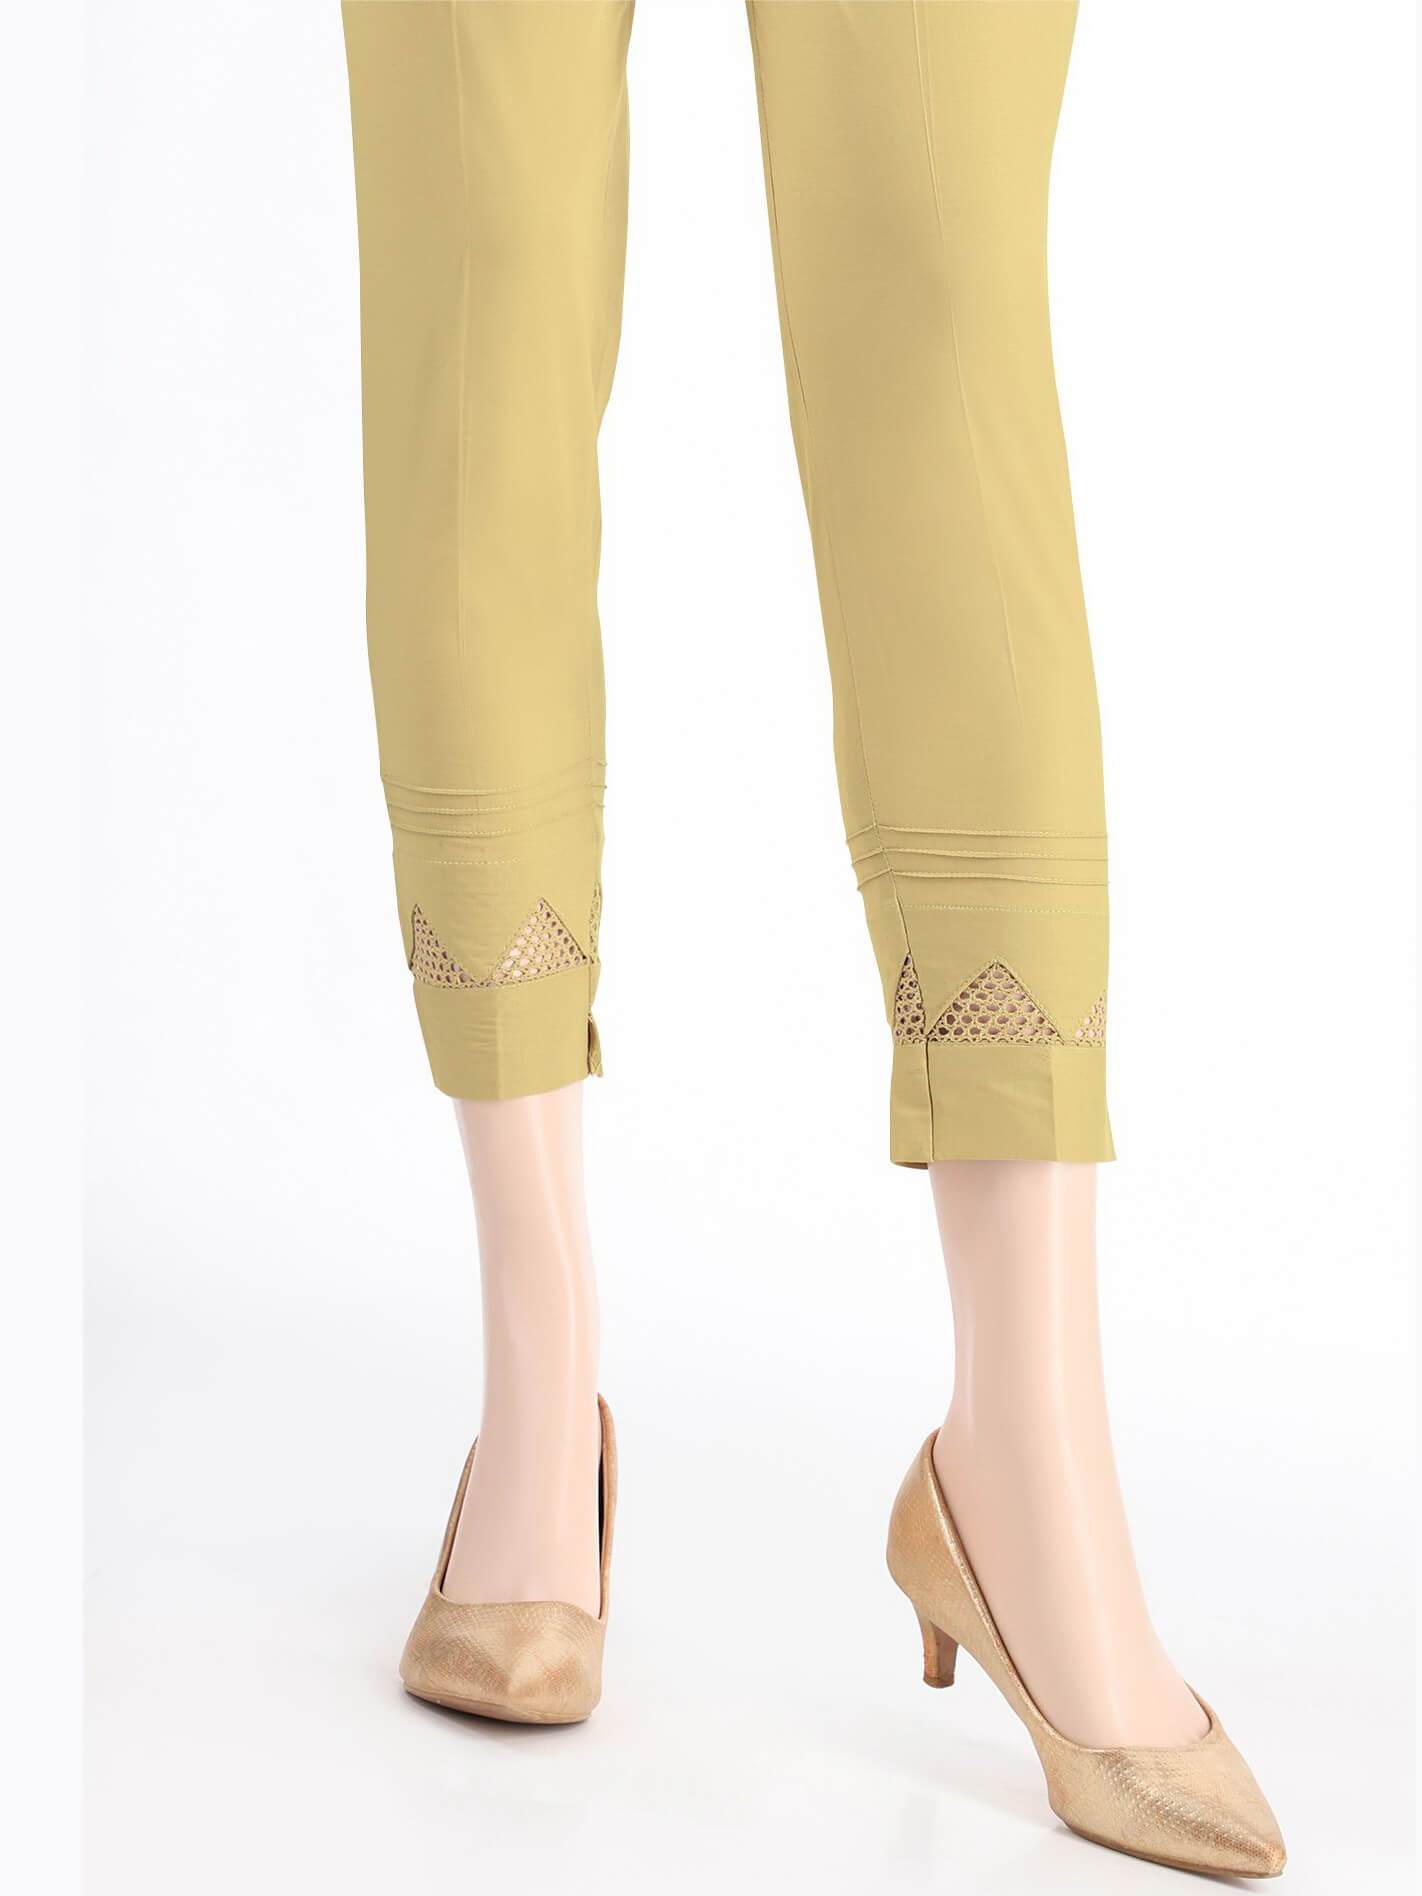 Buy Online Unstitched Trousers for Women  Best ladies Trousers  Zardi